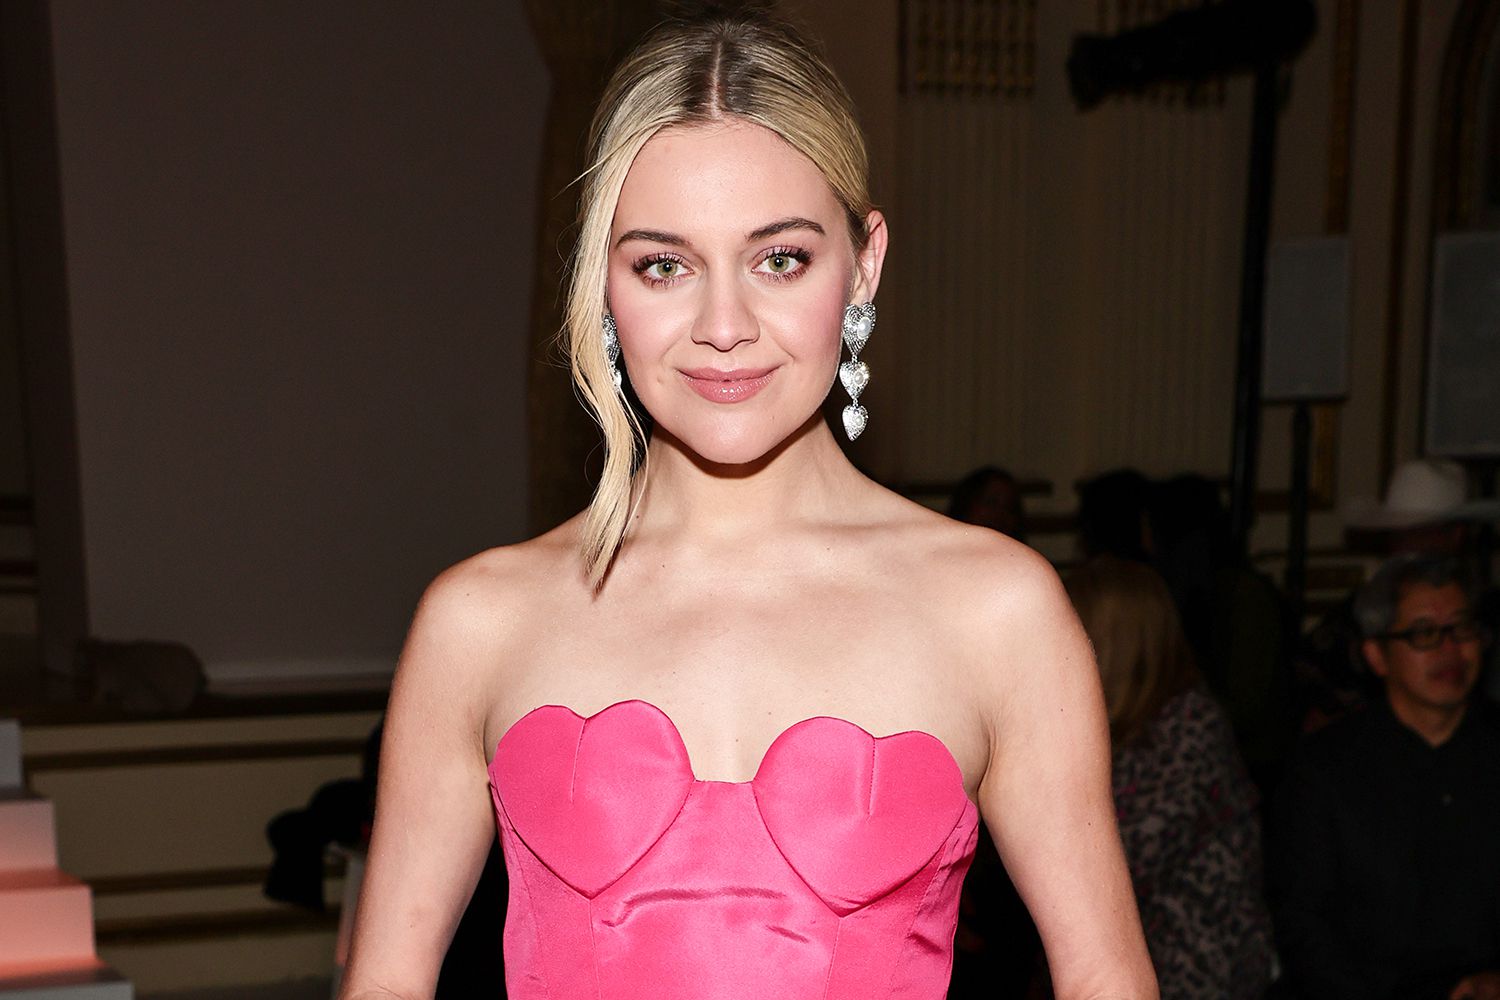 Kelsea Ballerini attends the Carolina Herrera show during New York Fashion Week: The Shows at The Plaza Hotel